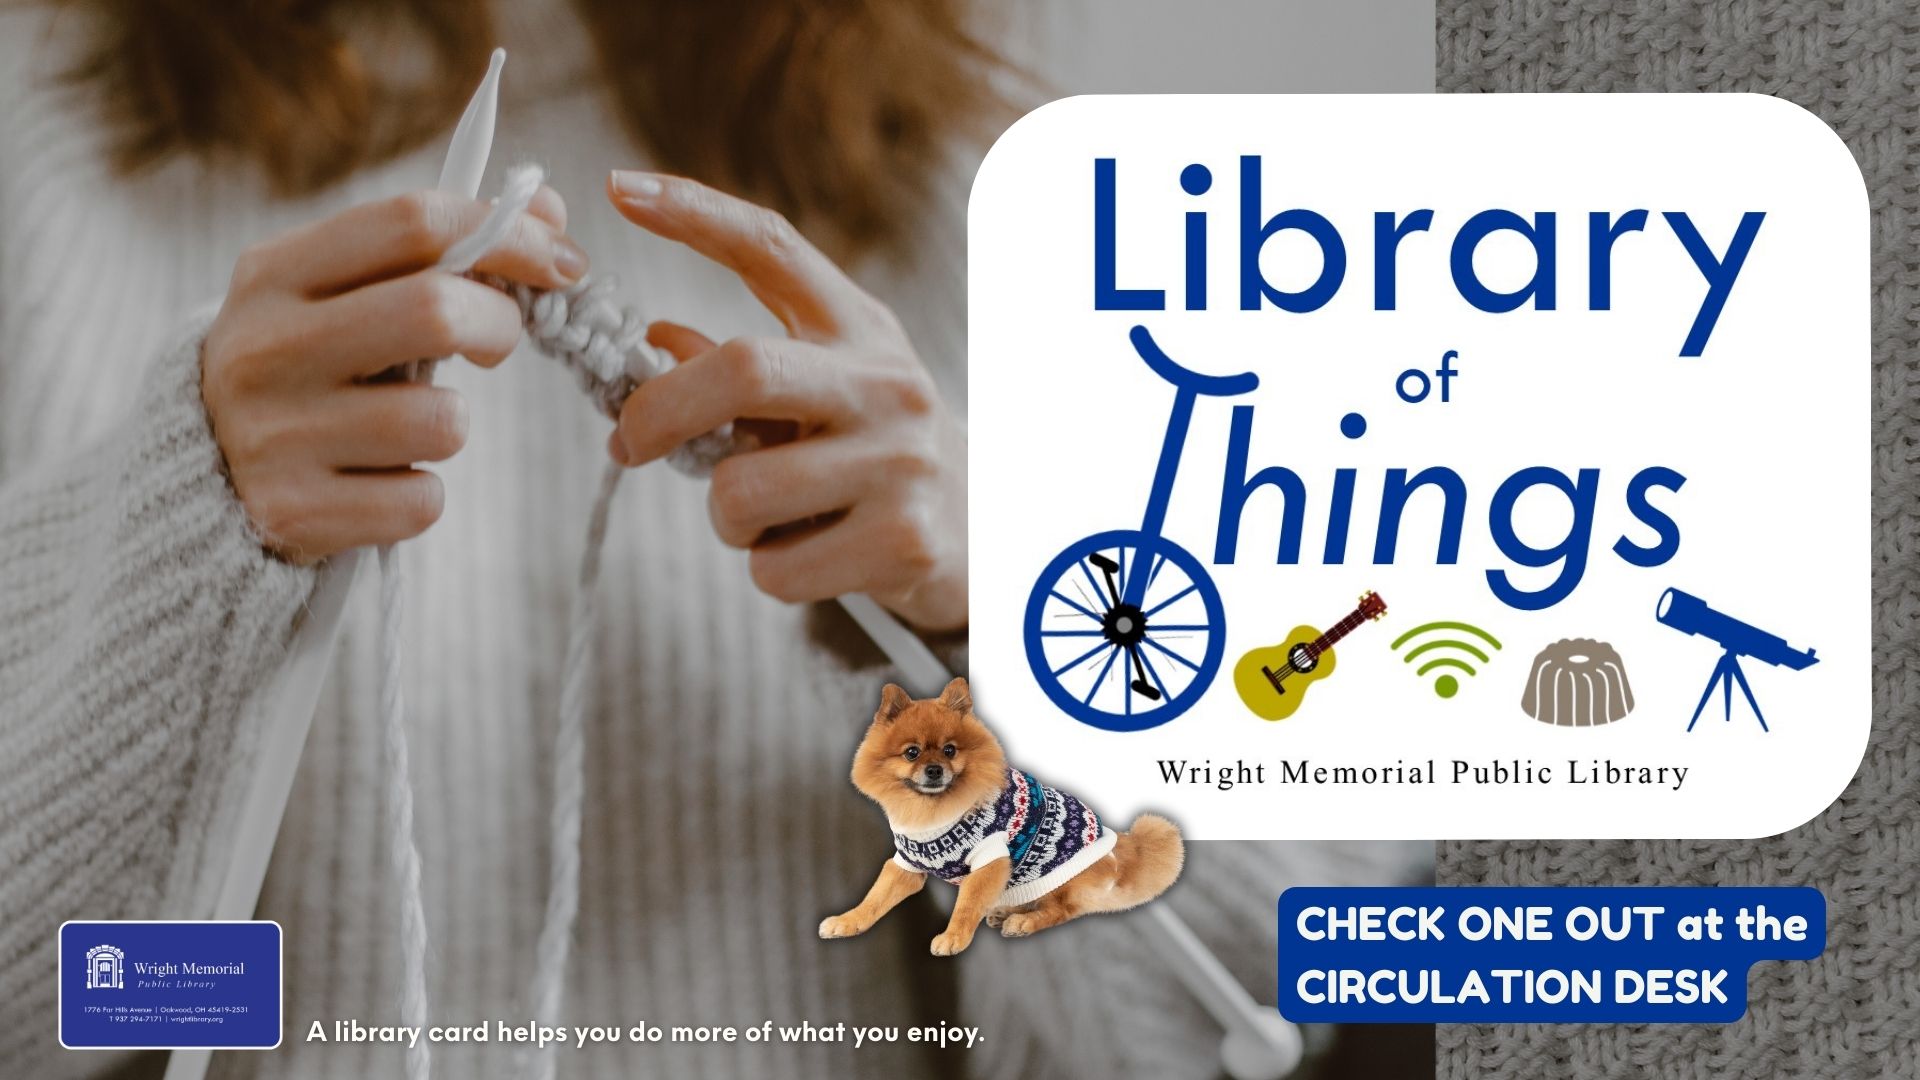 Person knitting next to "Library of Things" logo